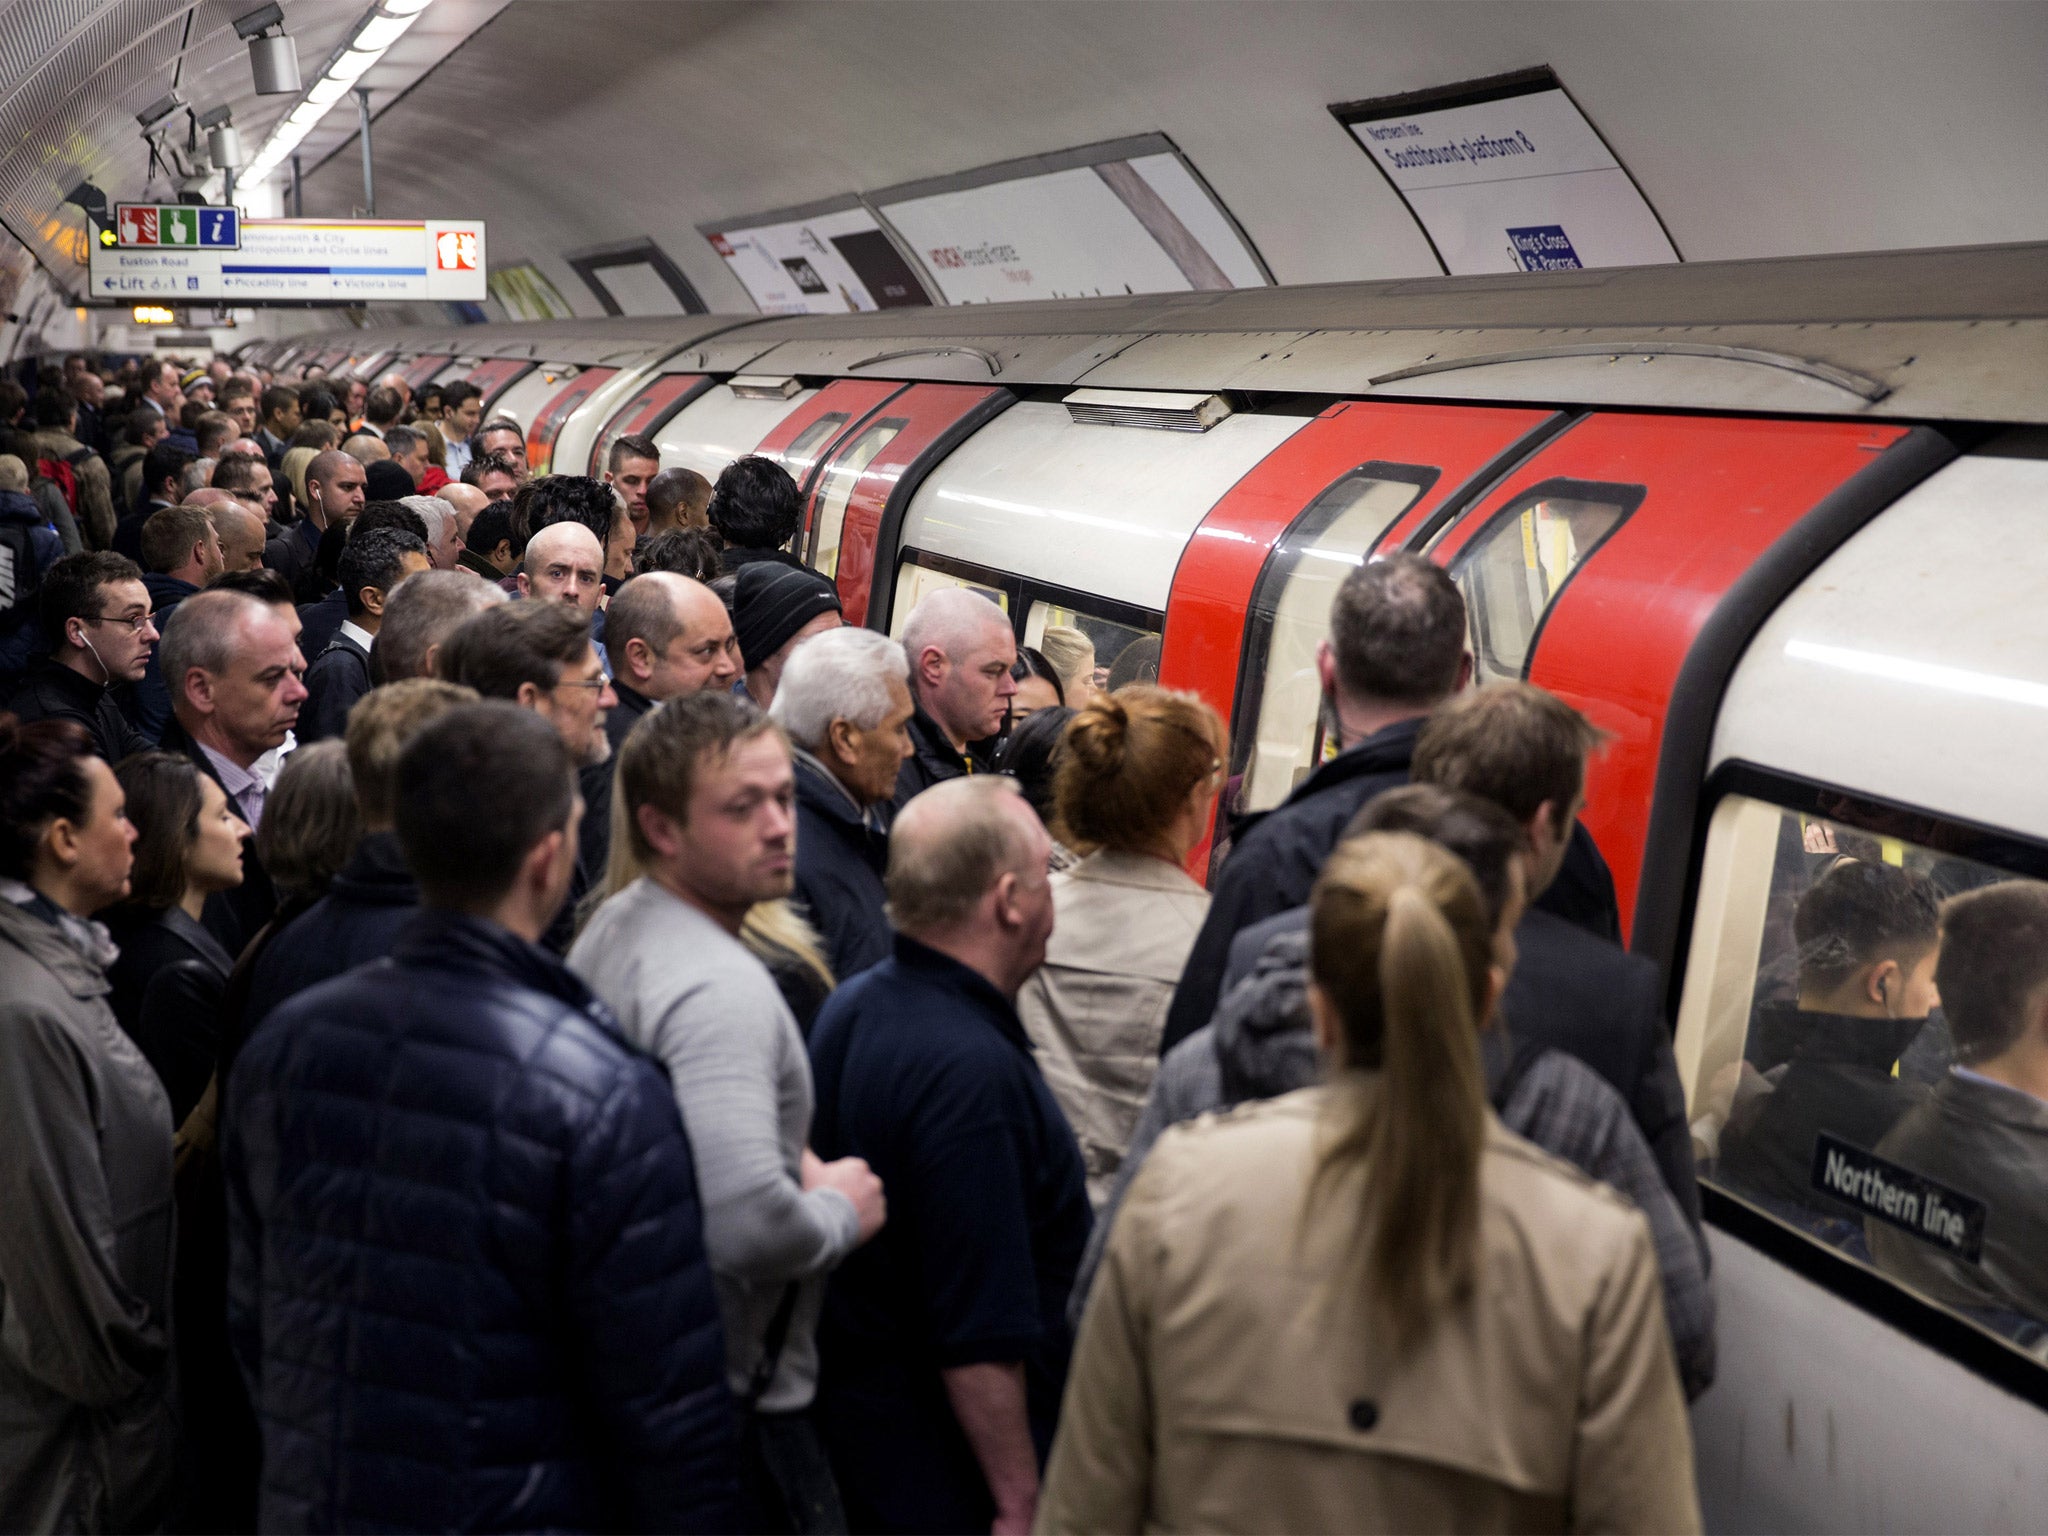 Thousands of London Underground passengers face fare increase from next year